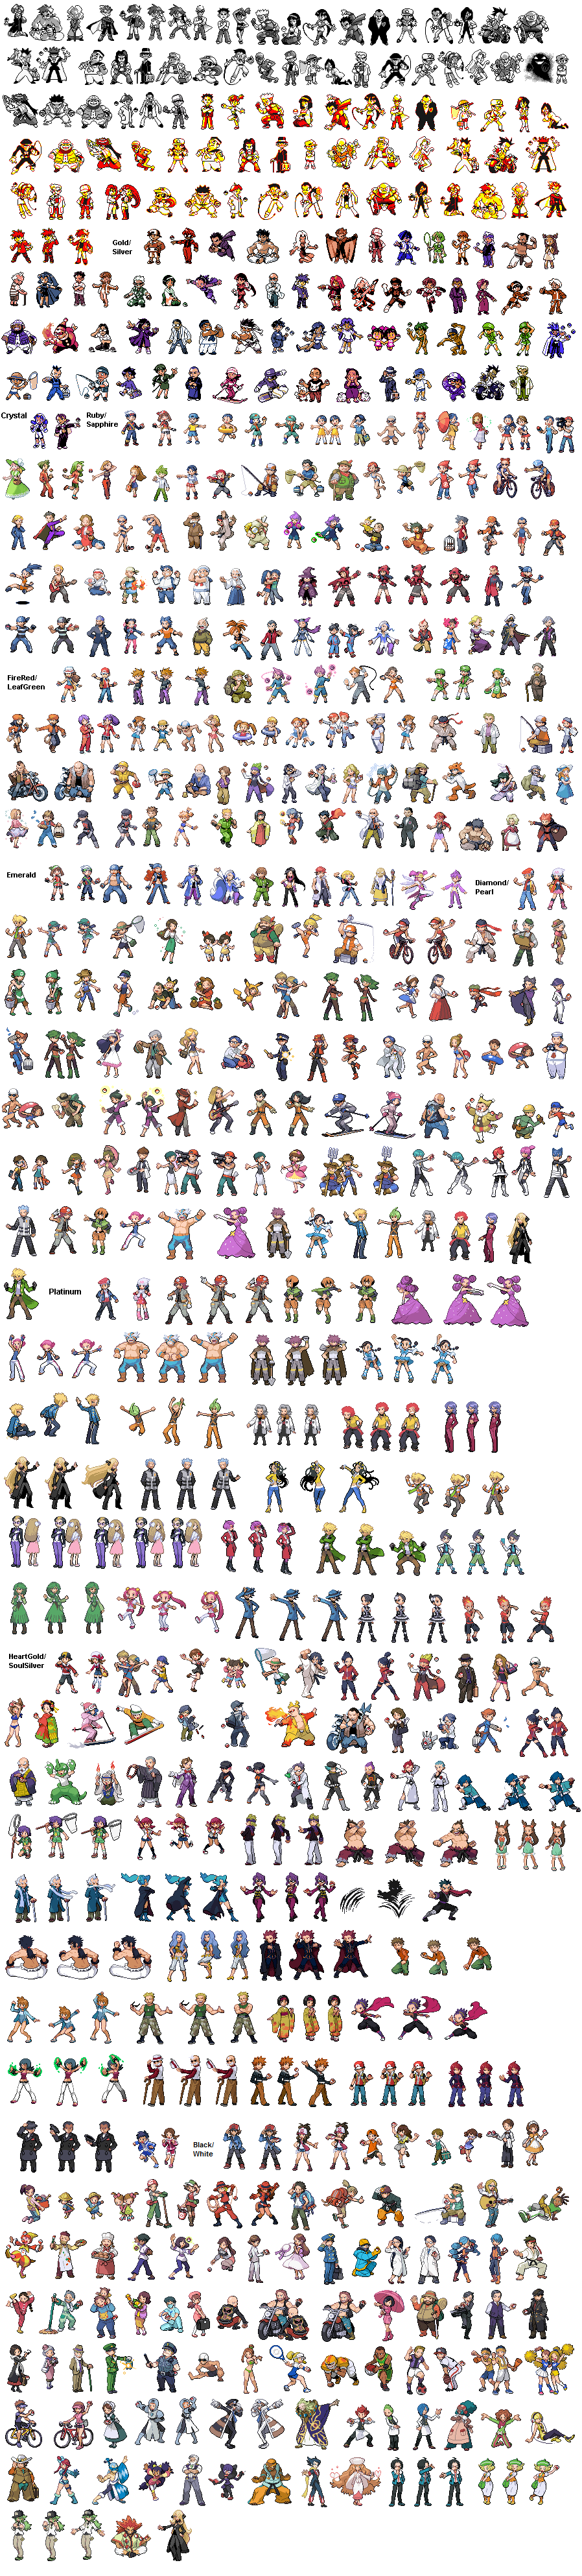 all_pokemon_trainer_sprites_by_kyogremaster-d2a19go.png